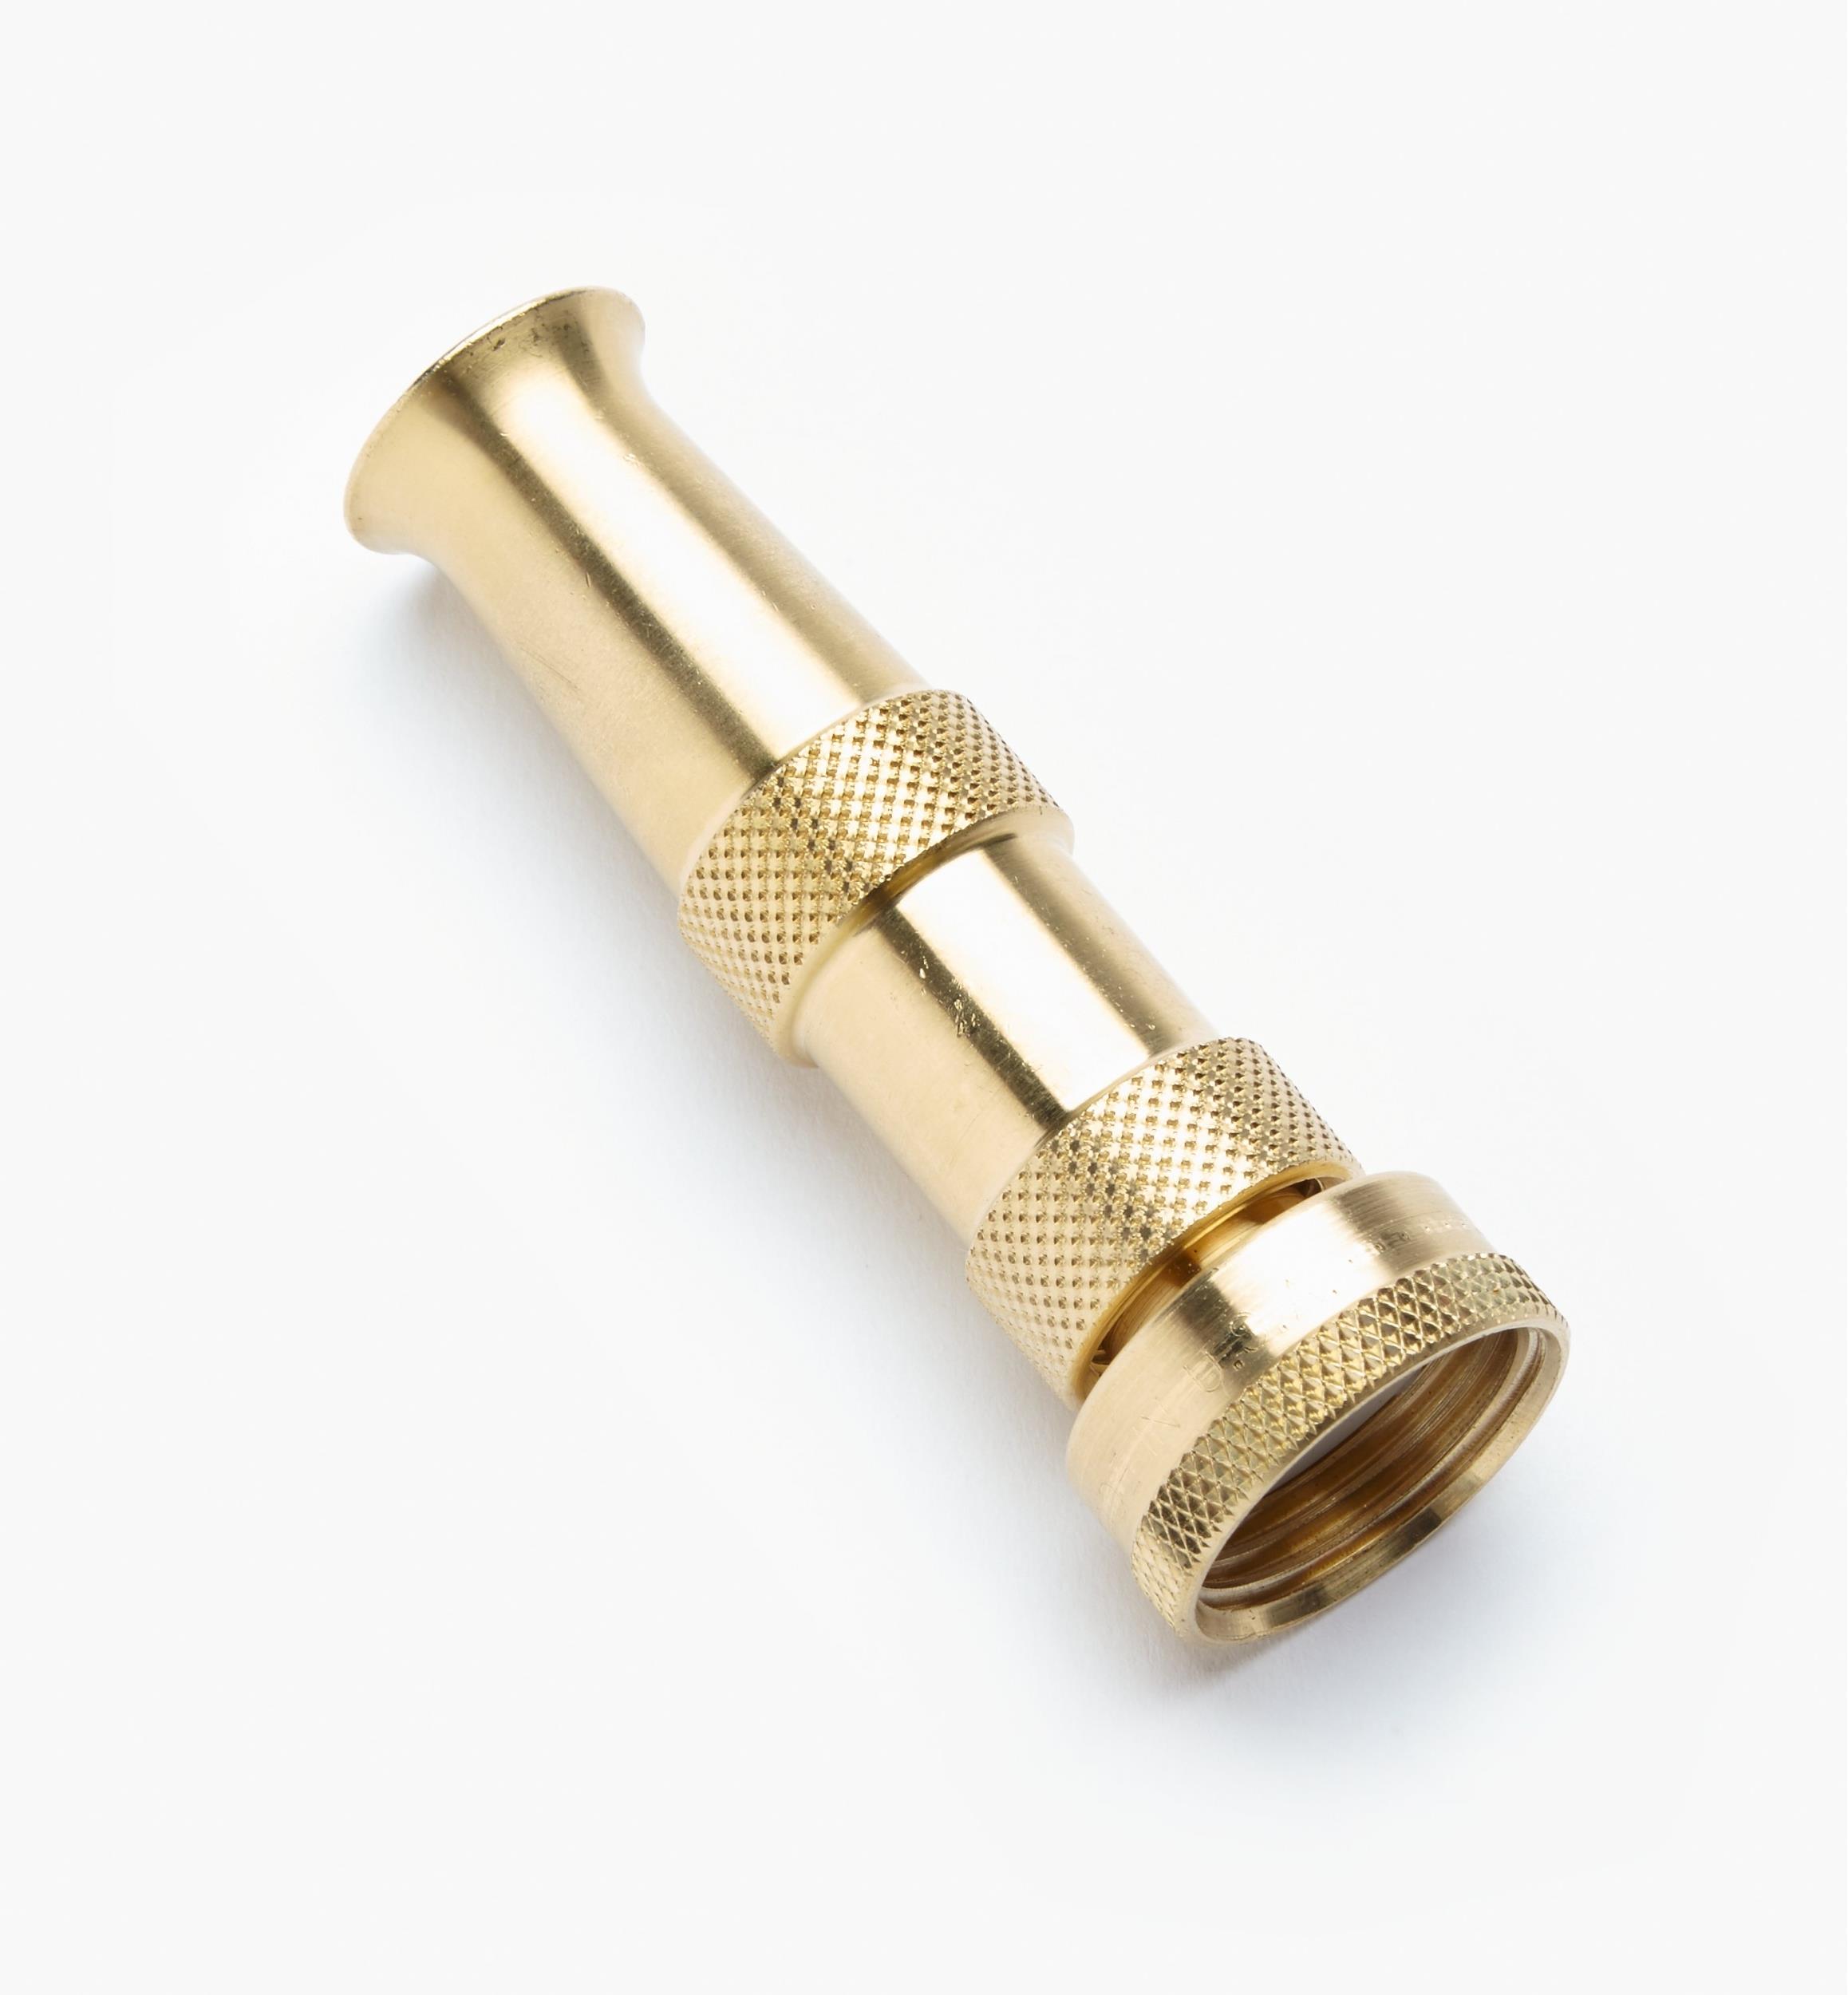 Female Brass Hose Coupler - Lee Valley Tools